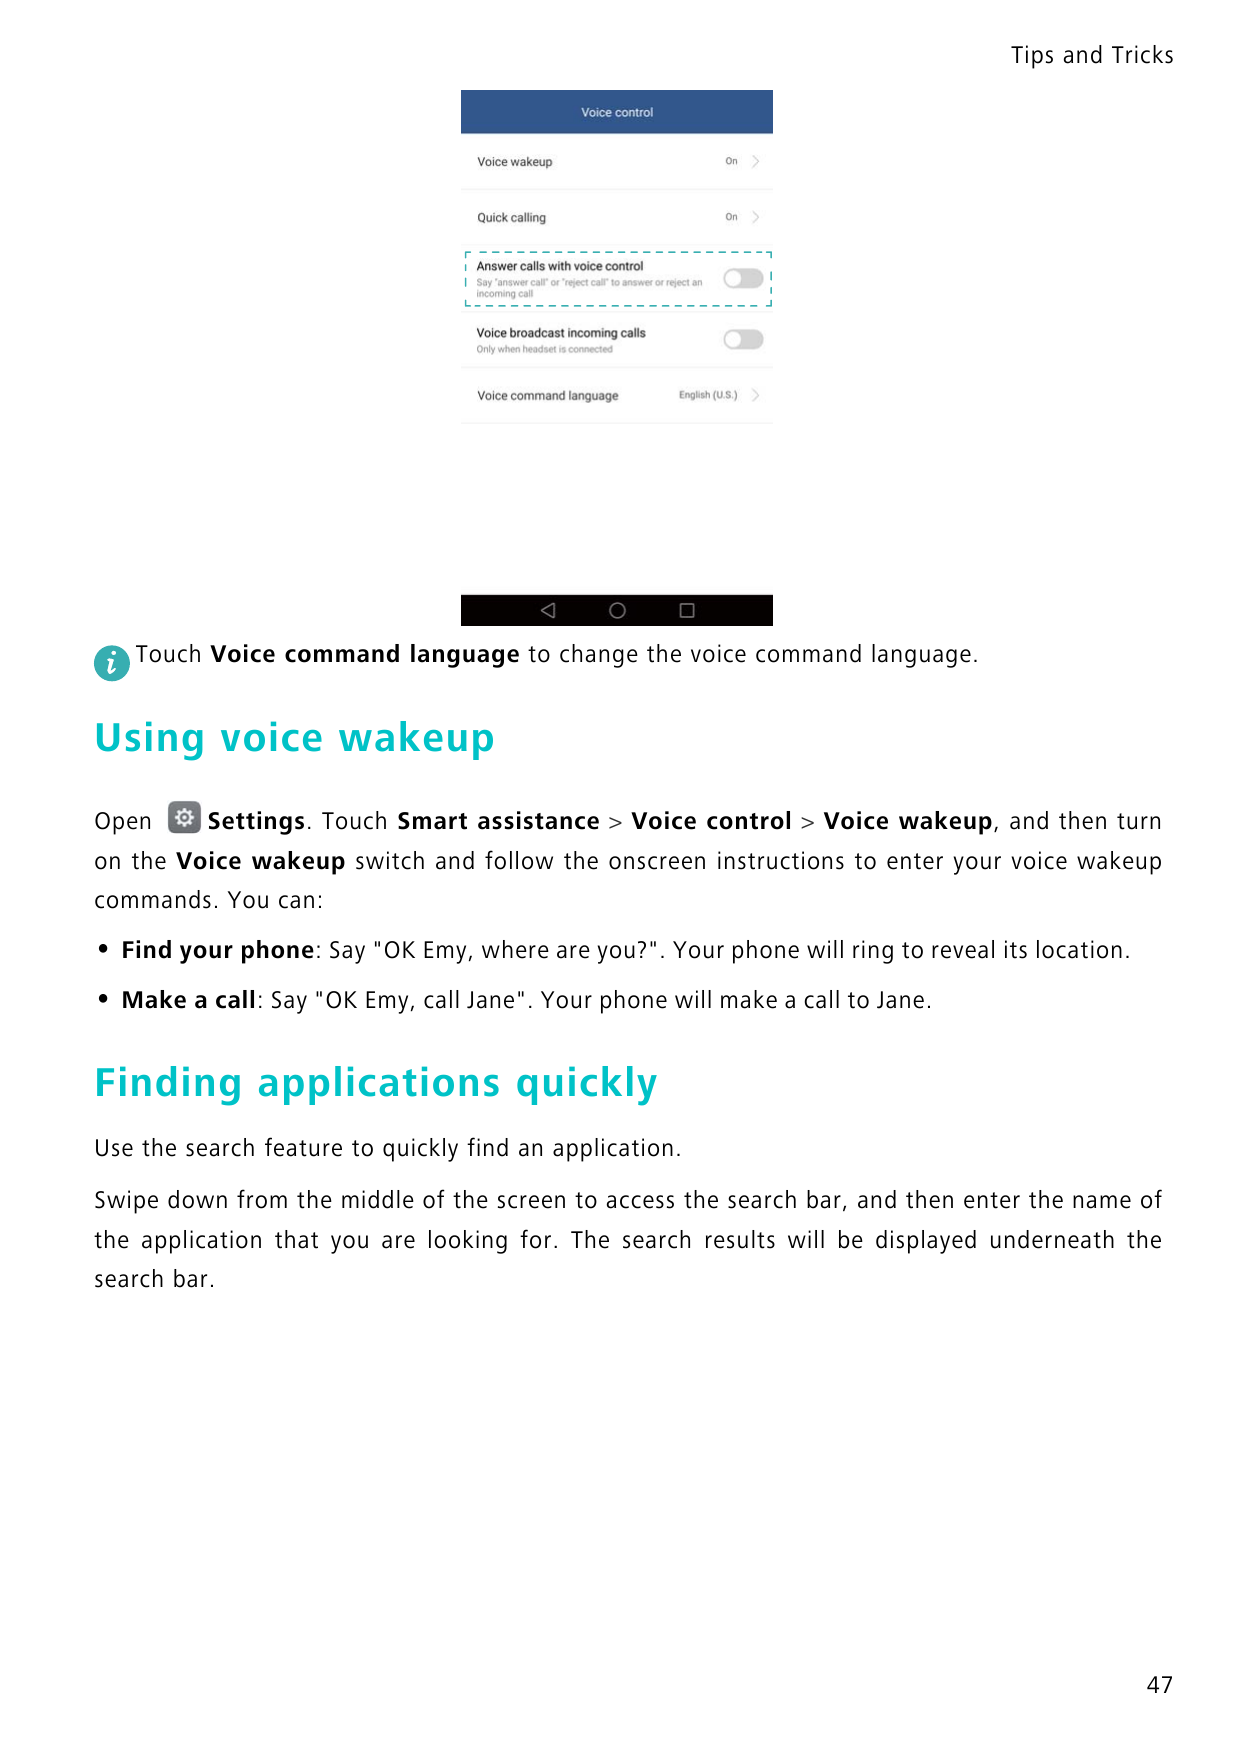 Tips and TricksTouch Voice command language to change the voice command language.Using voice wakeupOpenSettings. Touch Smart ass